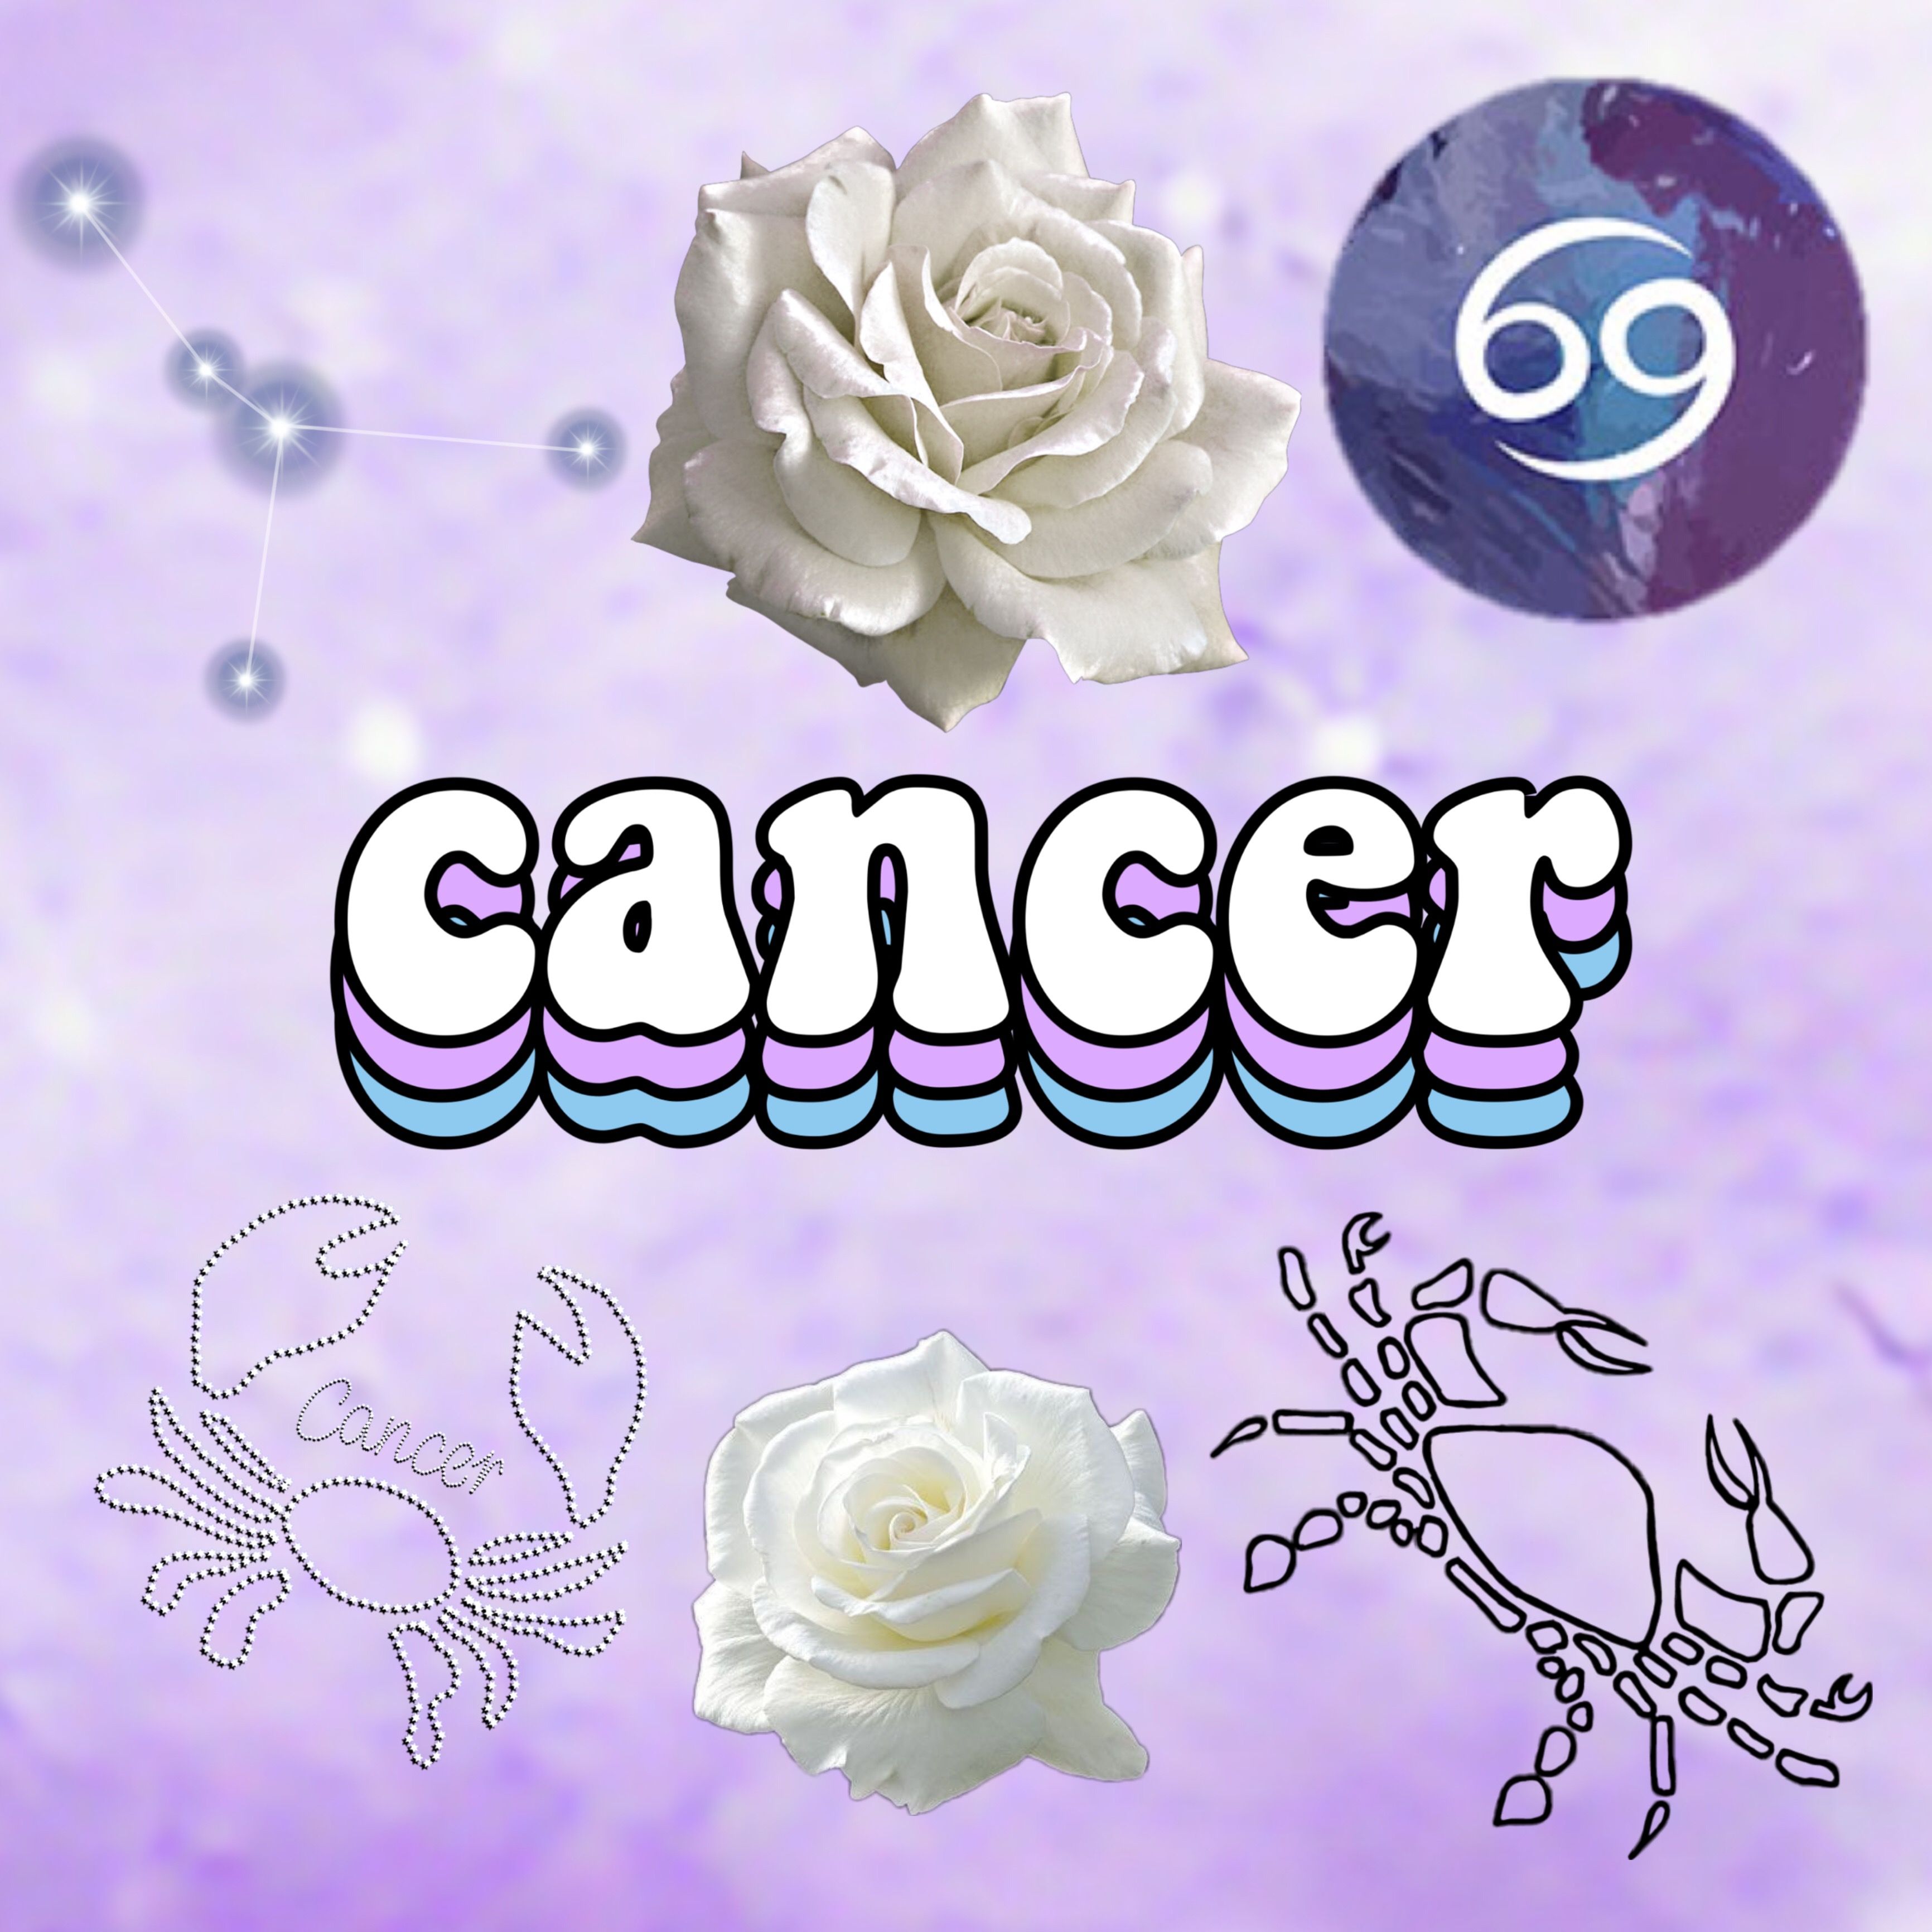 Cancer Aesthetic Wallpaper Free Cancer Aesthetic Background